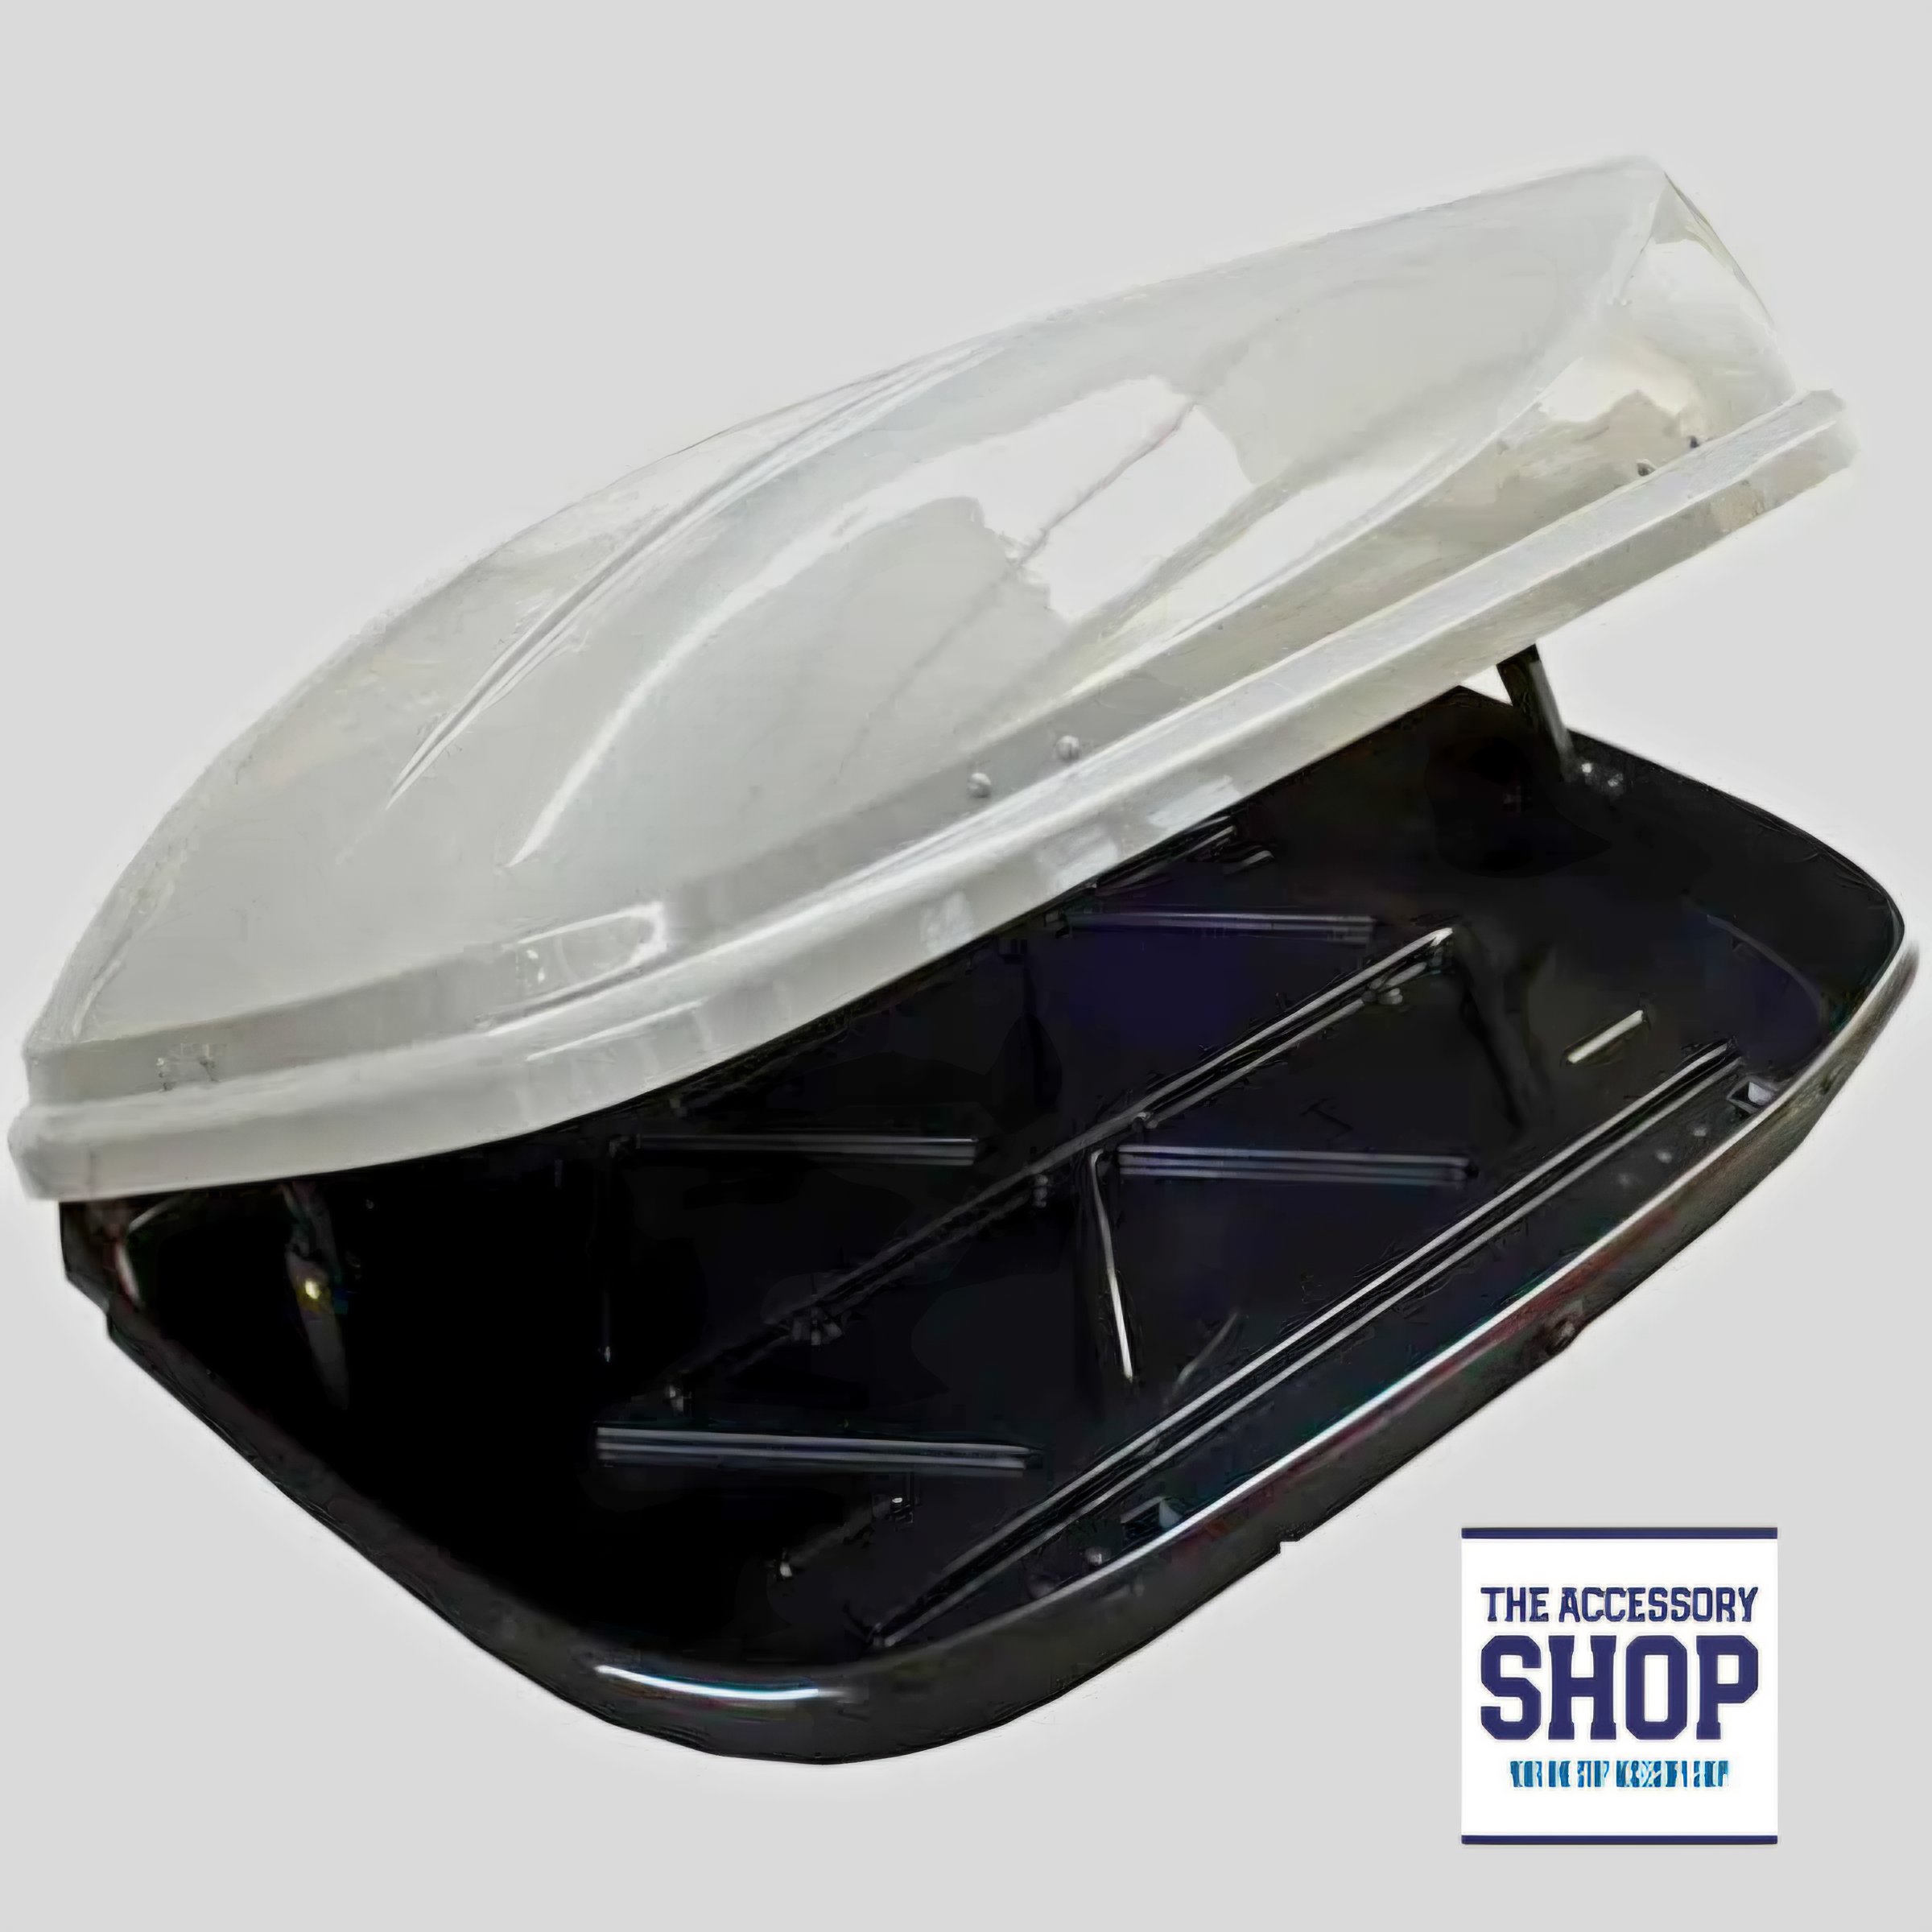 Car Roof Top Box – 480 Litre (Black or White) - The Accessory Shop